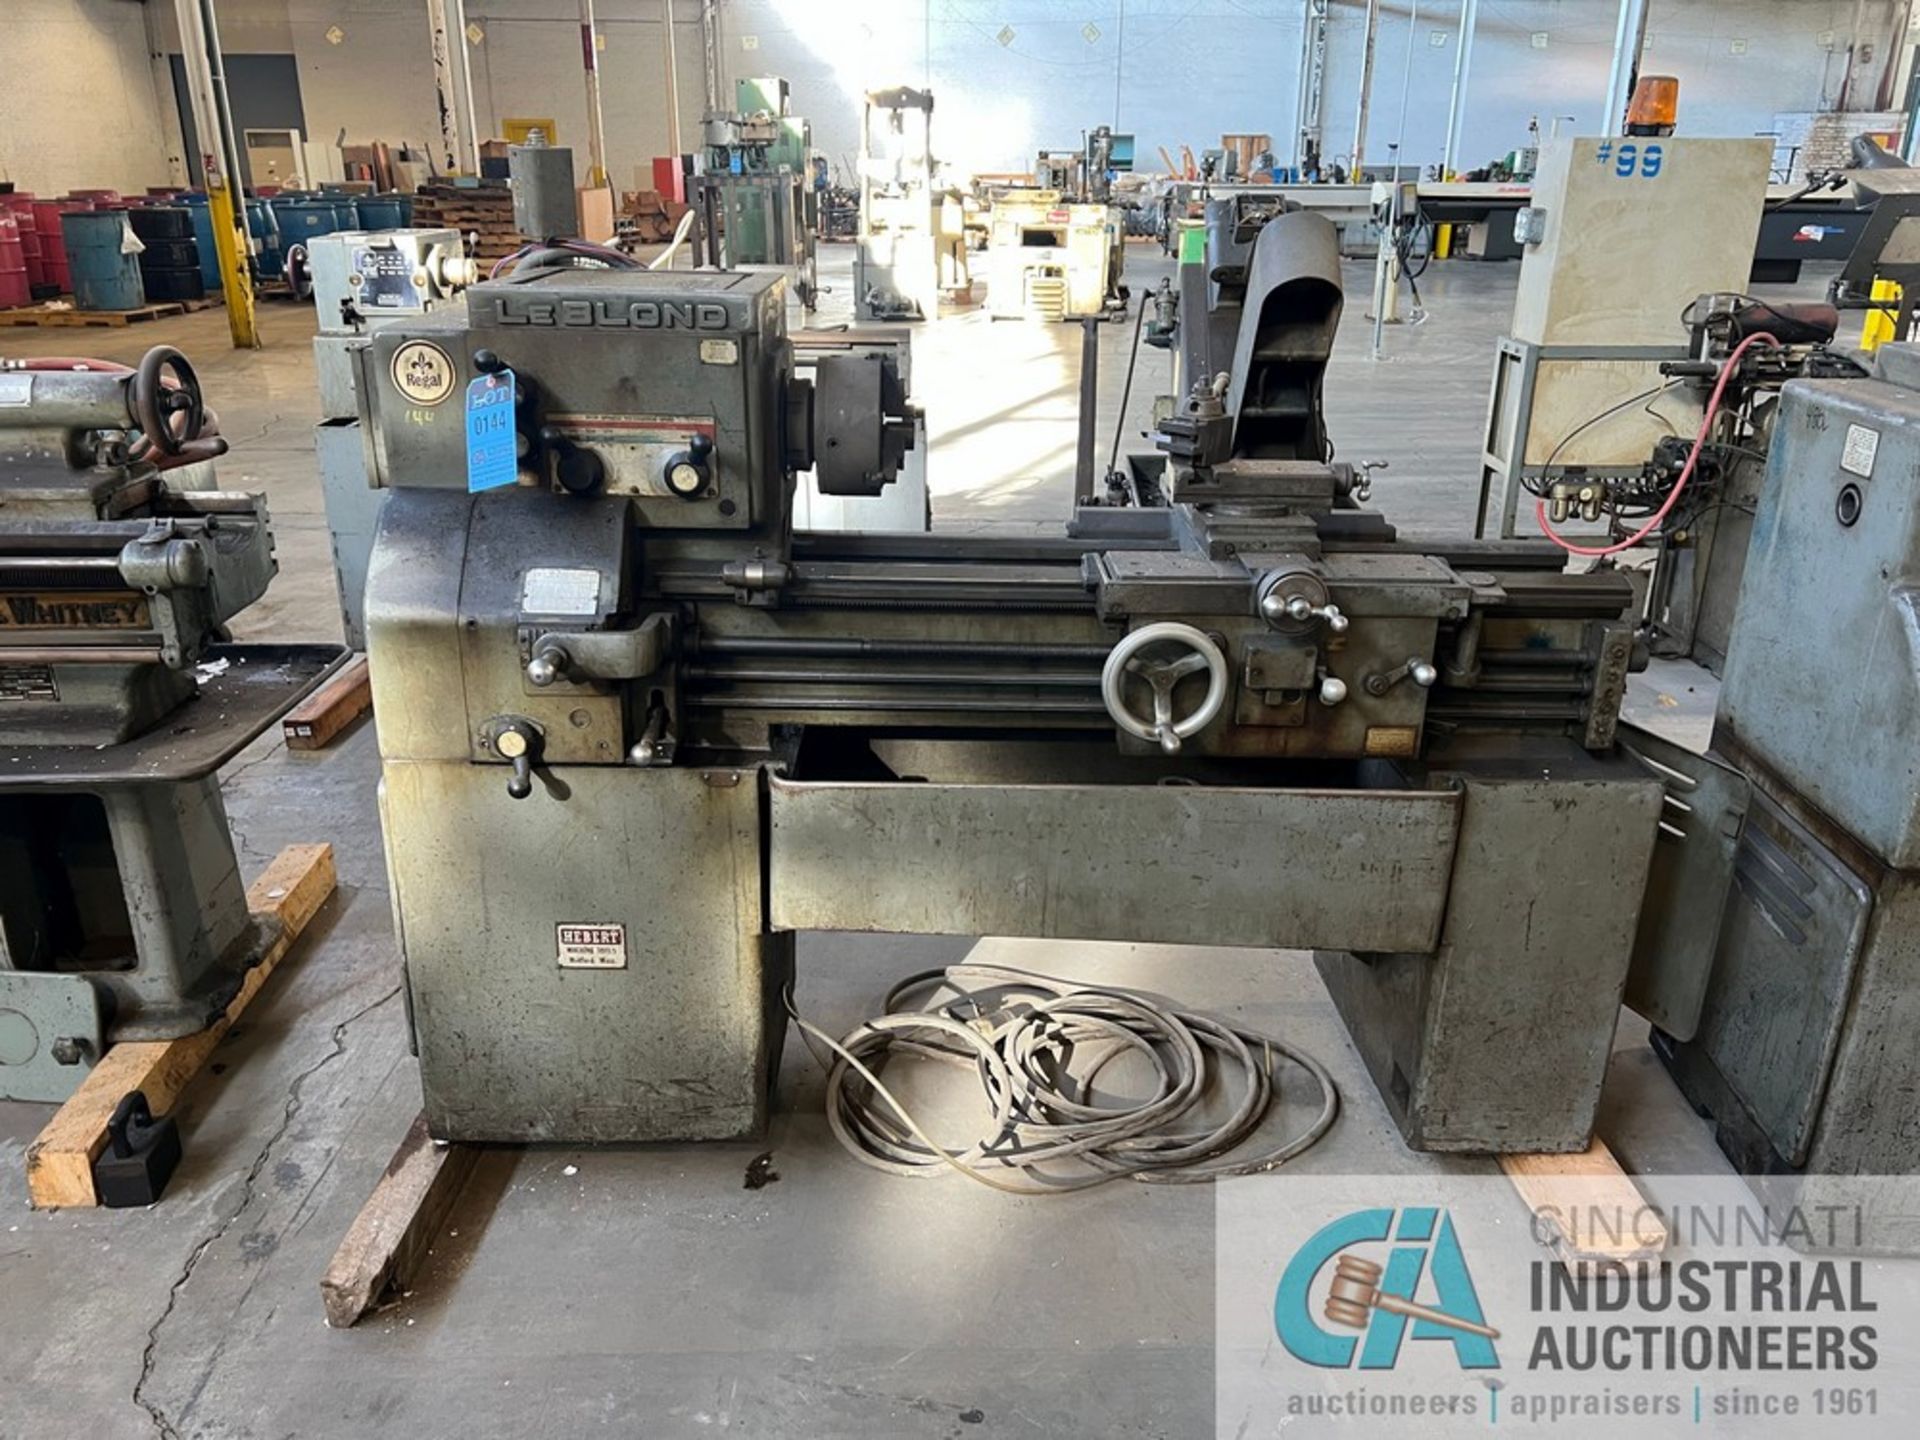 16" X 36" LEBLOND REGAL LATHE; S/N 6C-425, 8" 3-JAW CHUCK, NO TAILSTOCK, 1-1/2" SPINDLE HOLE